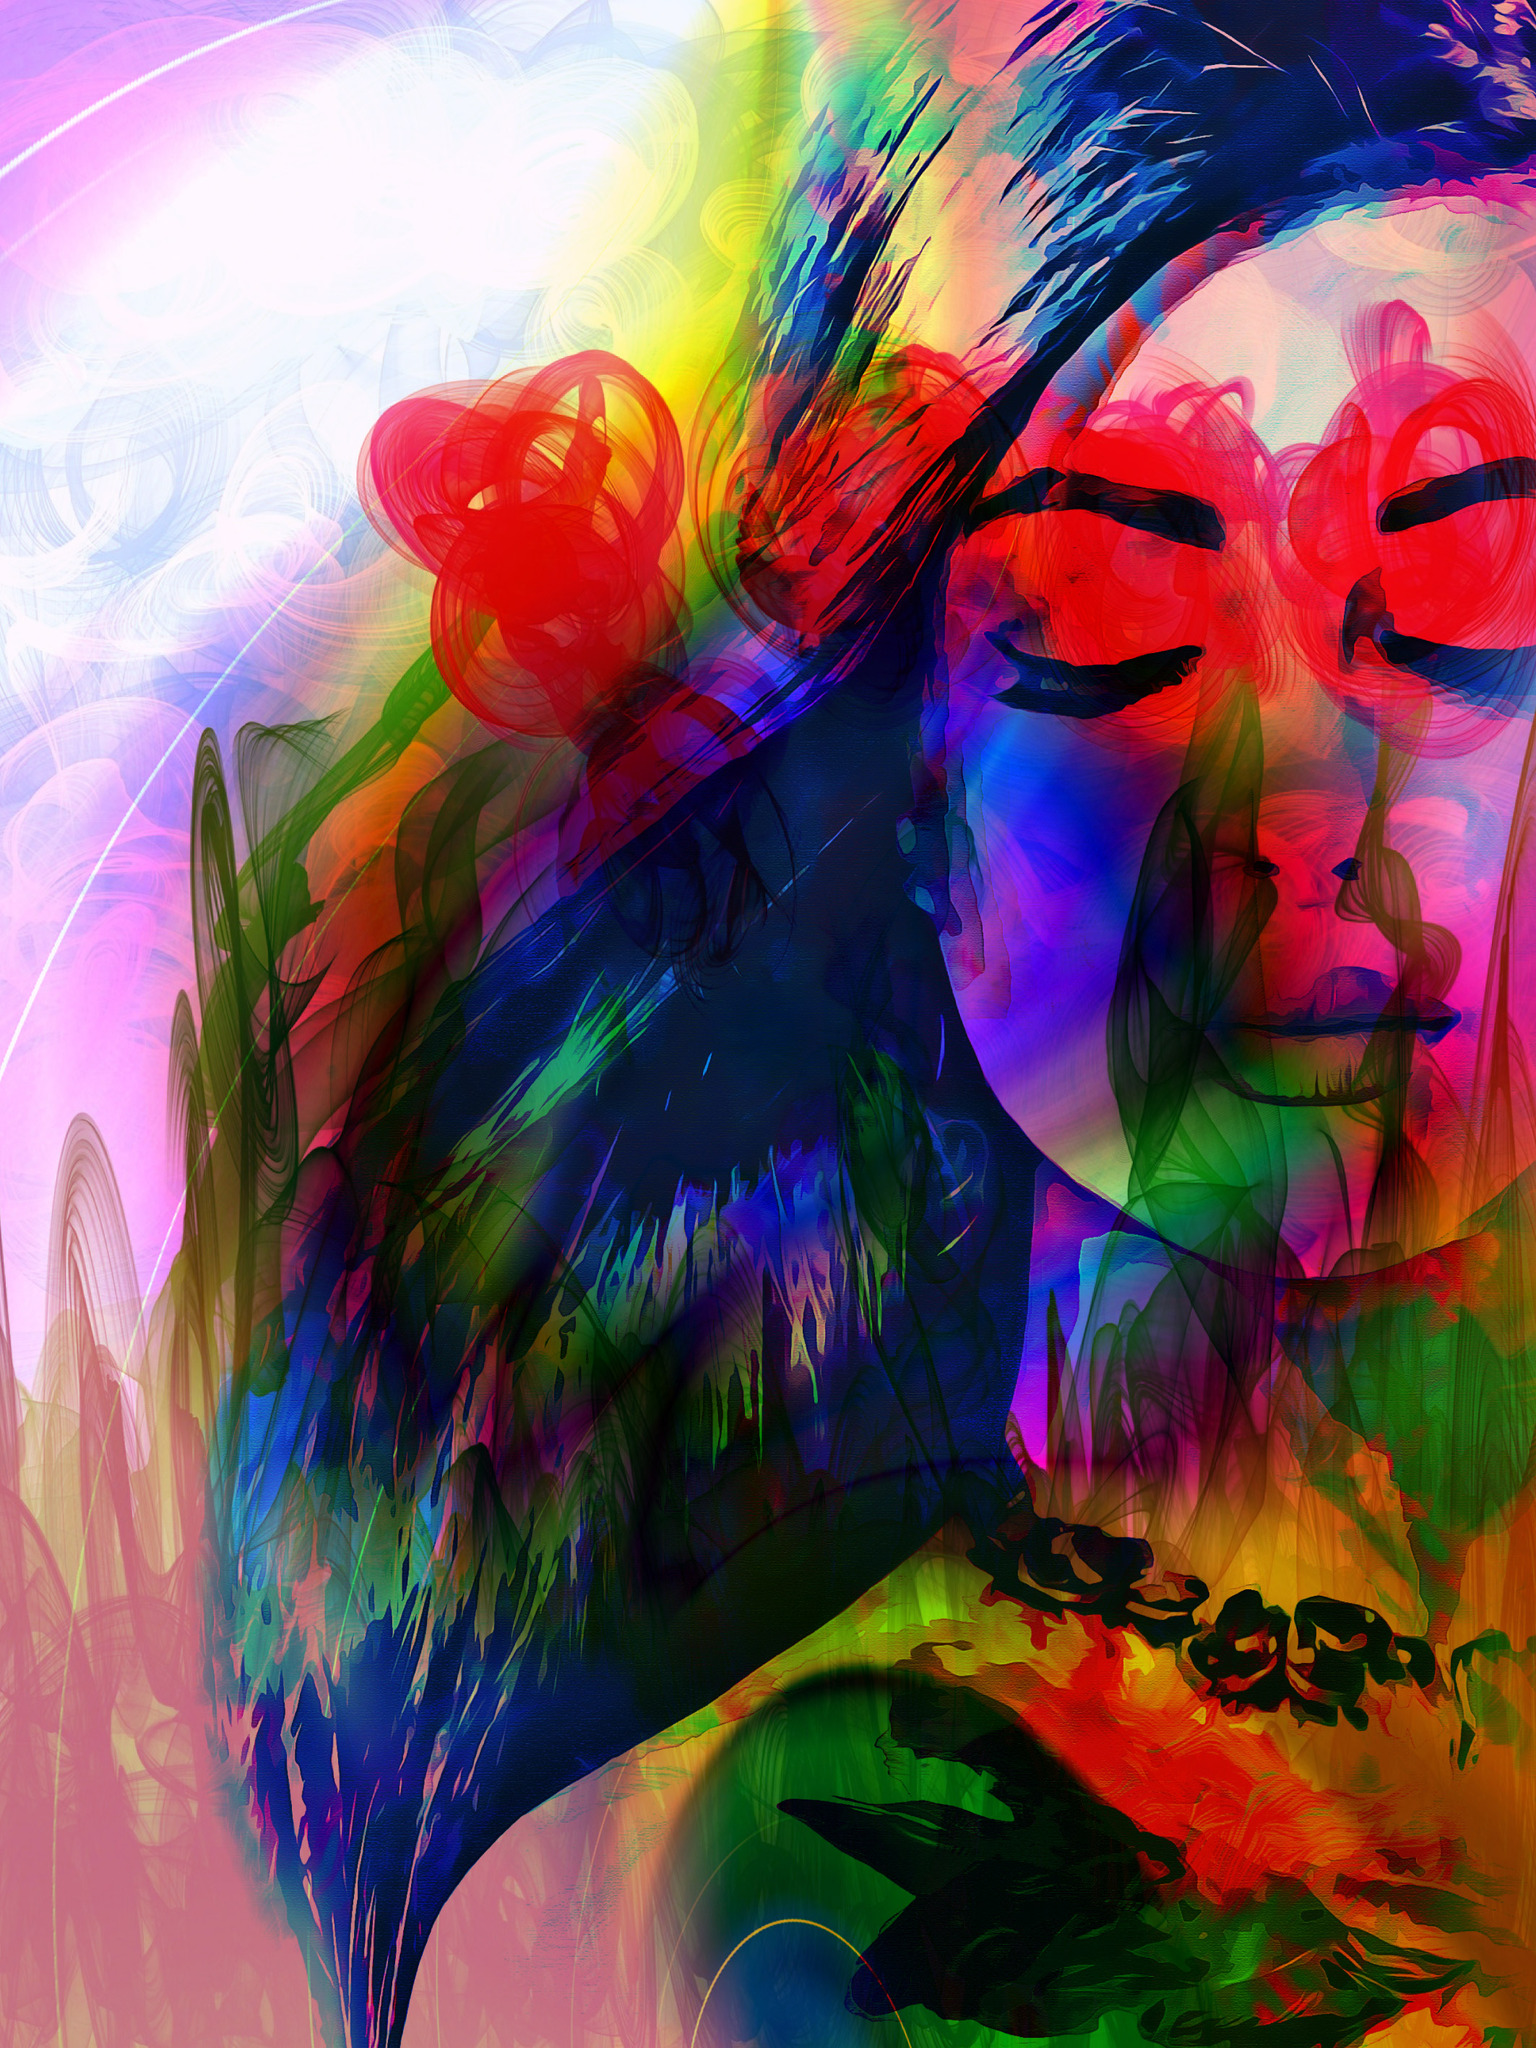 Graphic Art "The beautiful woman's inner face"